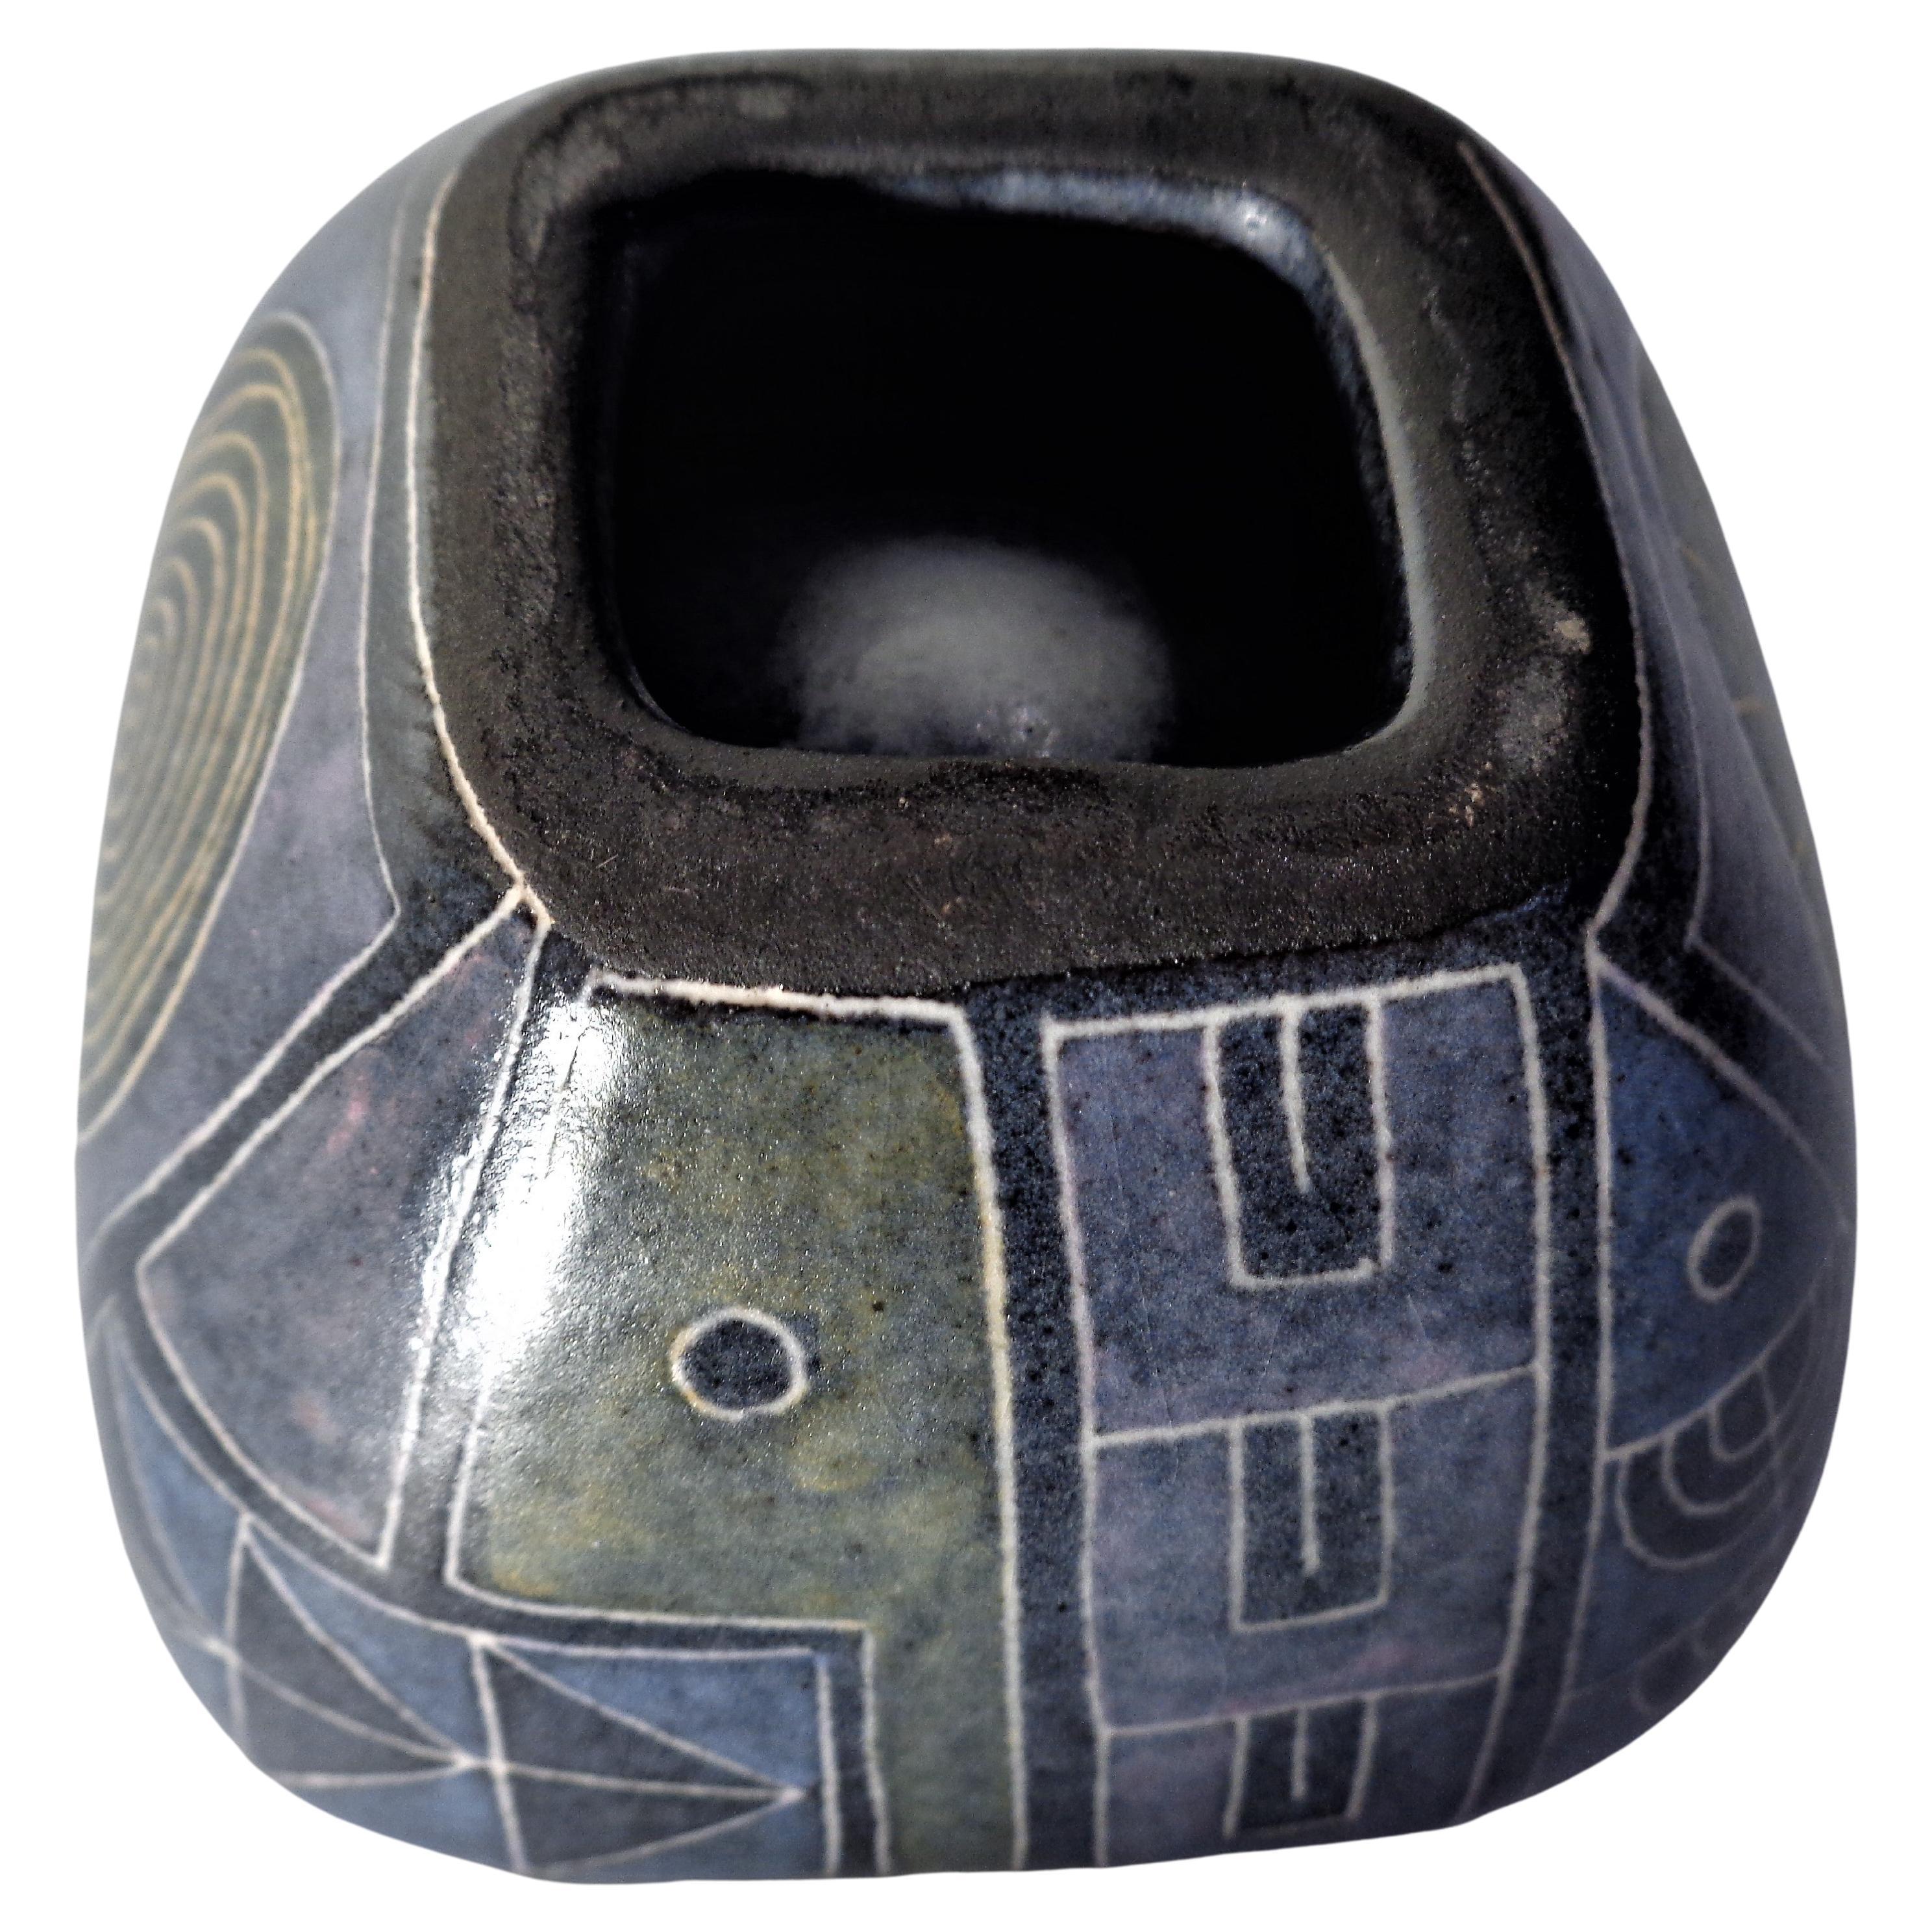  Lu Klopfer Geometric Sgrafitto Pottery Collection, Germany 1950's 4